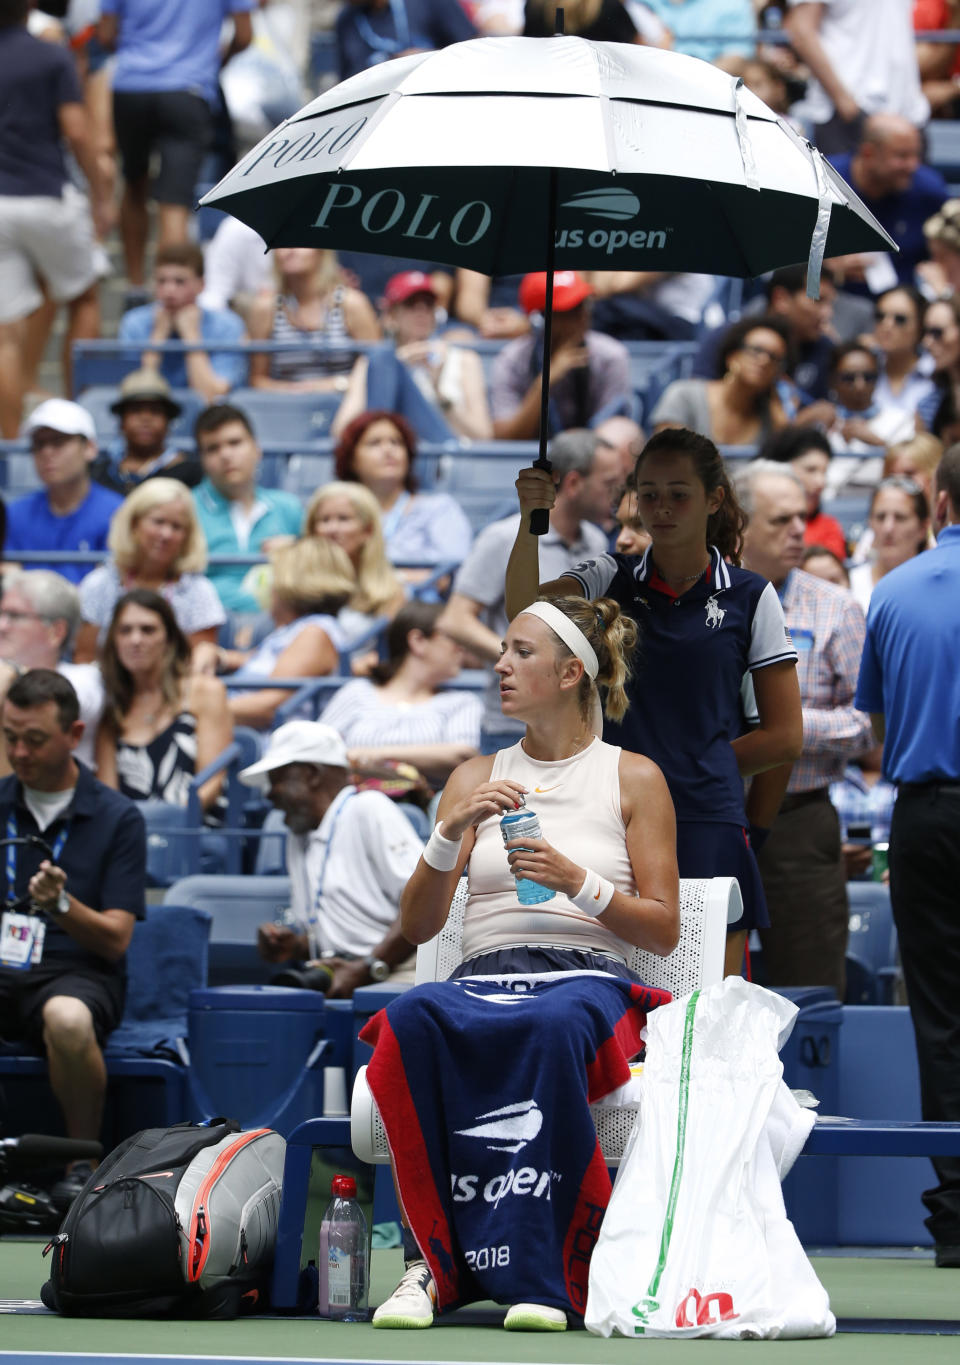 Victoria Azarenka, of Belarus, sits under and umbrella as the roof is closed during the third round of the U.S. Open tennis tournament against Sloane Stephens, Friday, Aug. 31, 2018, in New York. (AP Photo/Jason DeCrow)